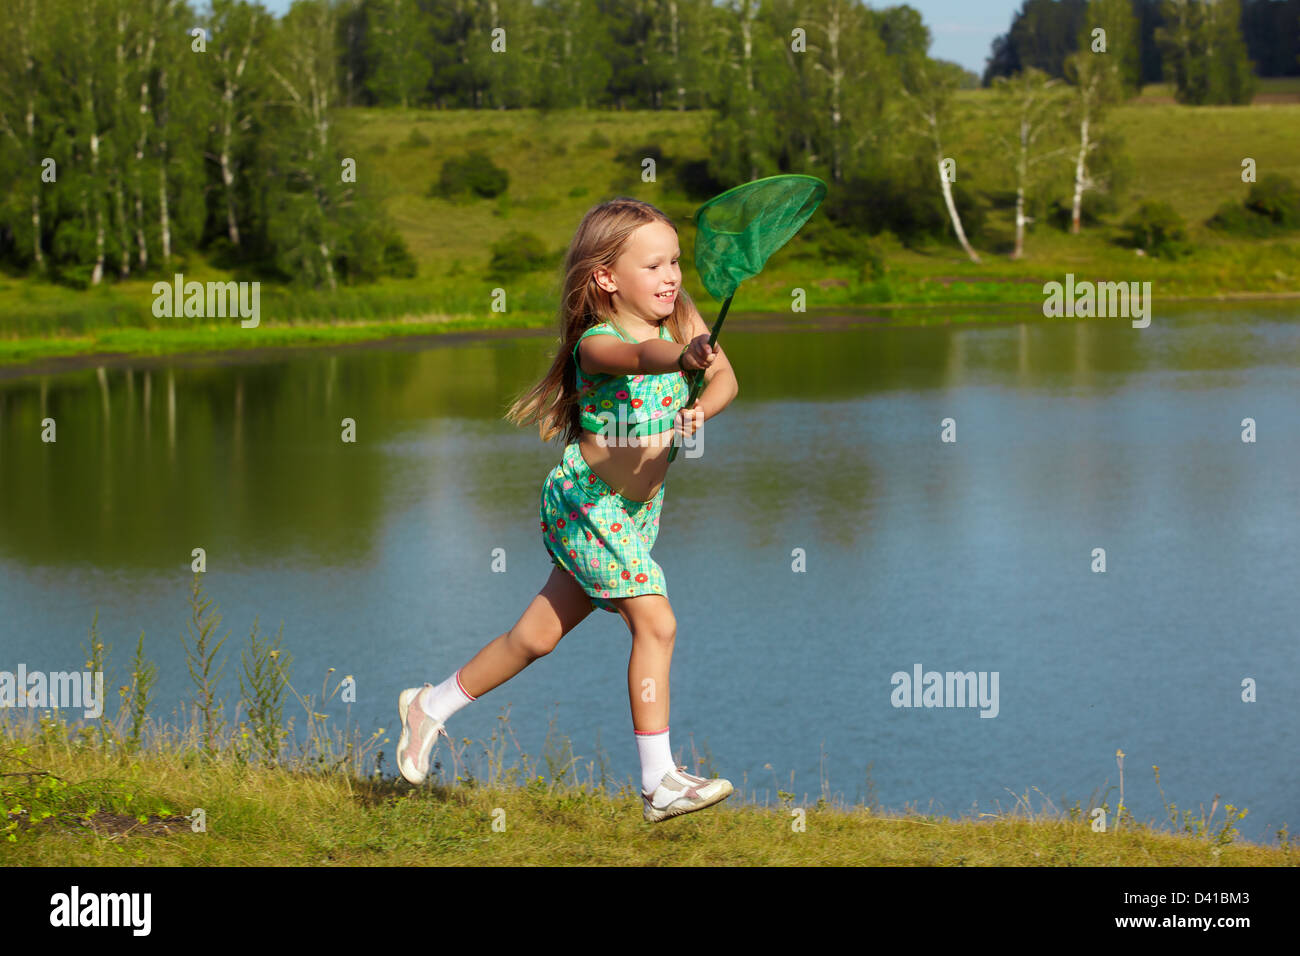 outdoor portrait of little girl running with butterfly net along the bank of the pond Stock Photo